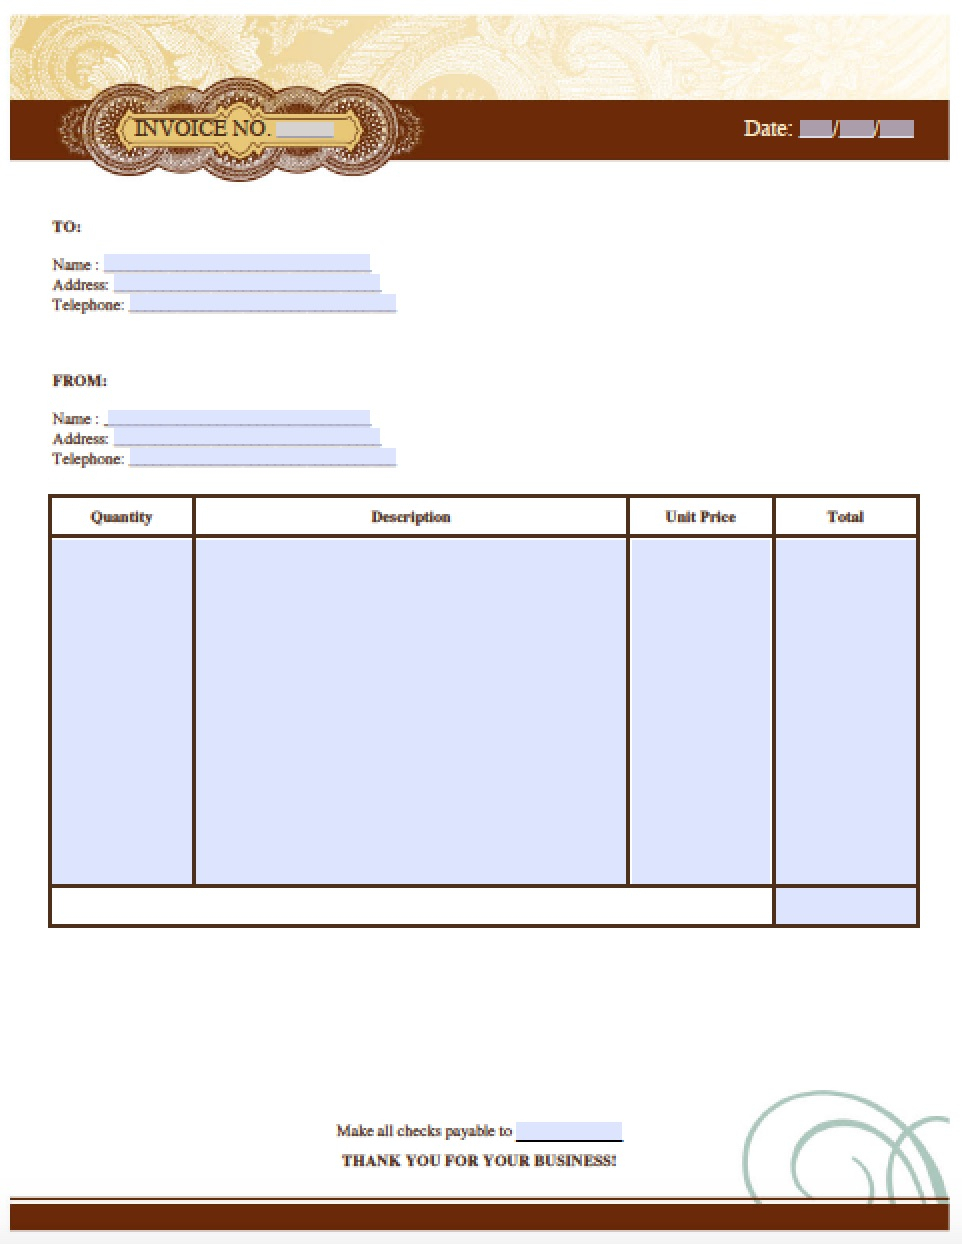 Free Artist Invoice Template | Excel | Pdf | Word (.doc) With Artist Invoice Samples